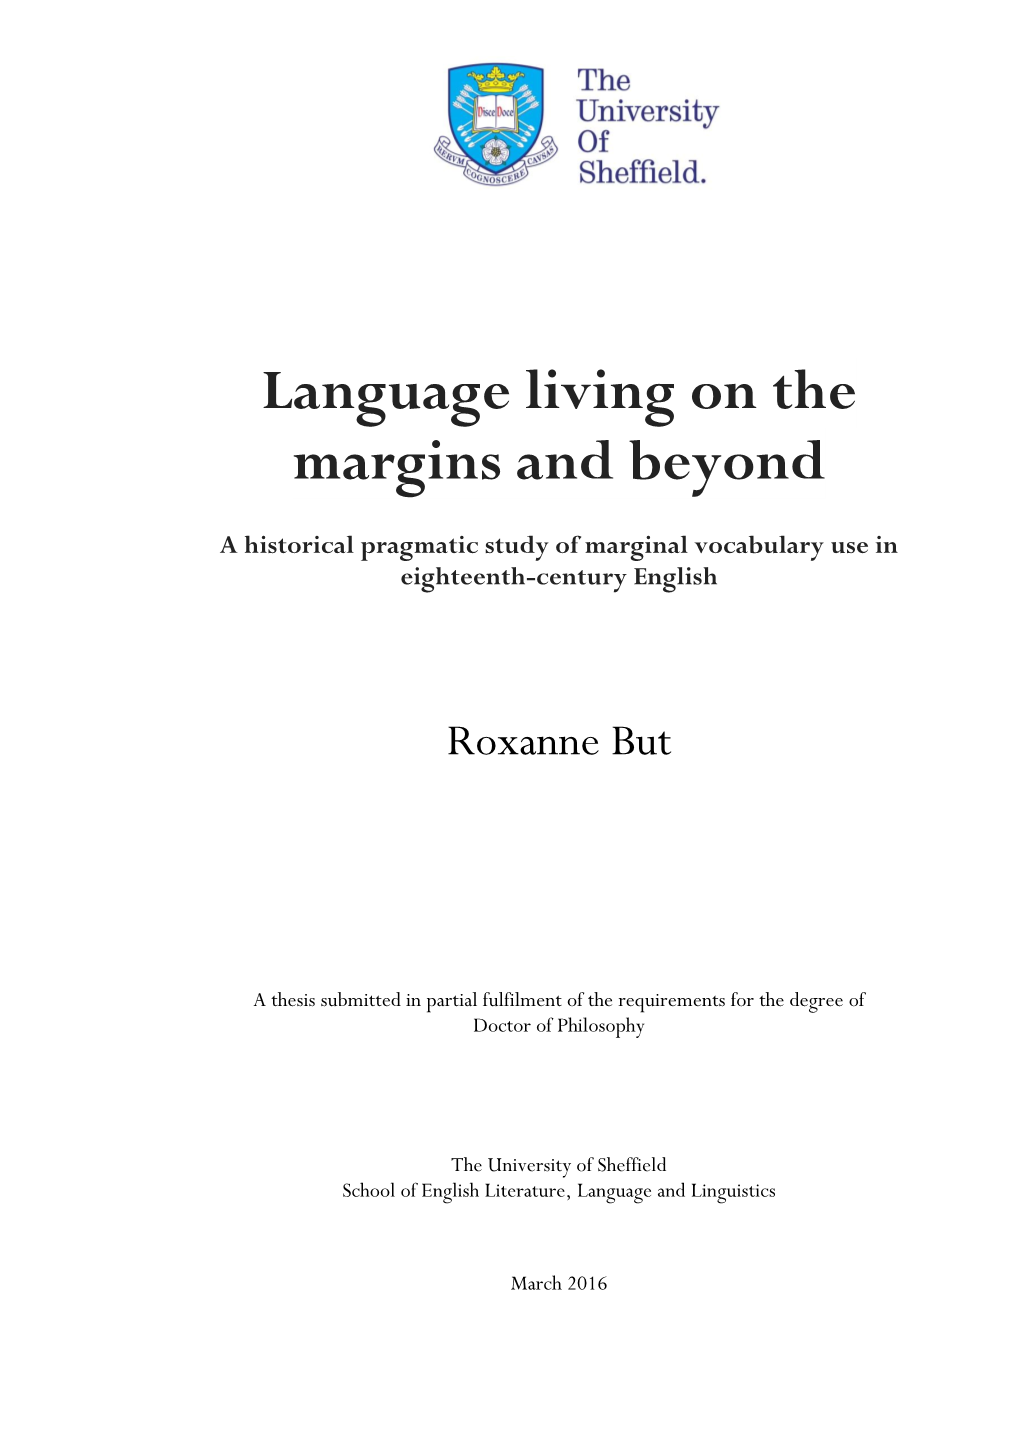 Language Living on the Margins and Beyond